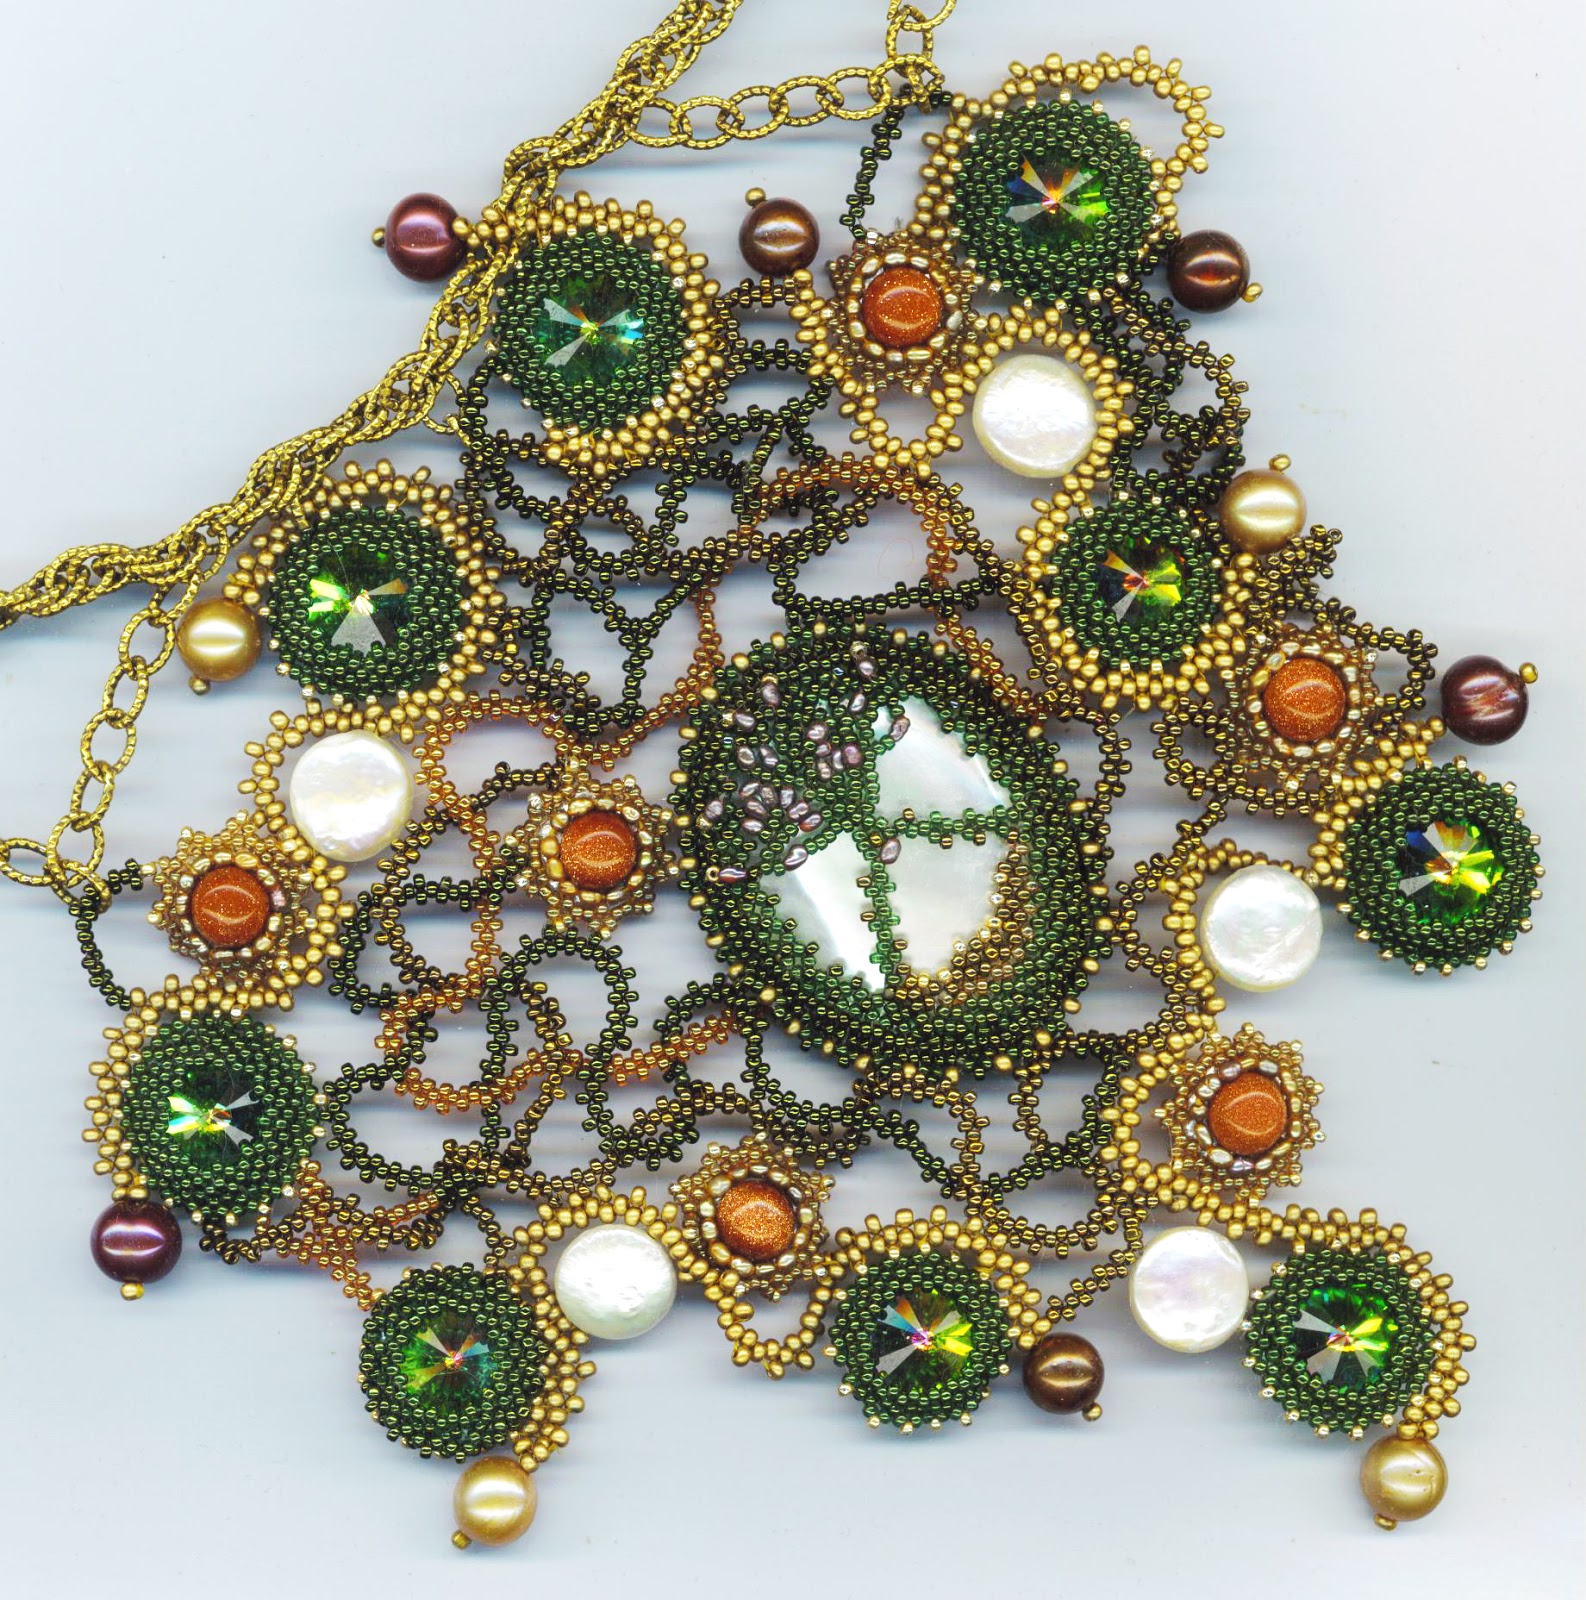 Enchanted Beads: My Battle of the Beadsmith 2013 entry
